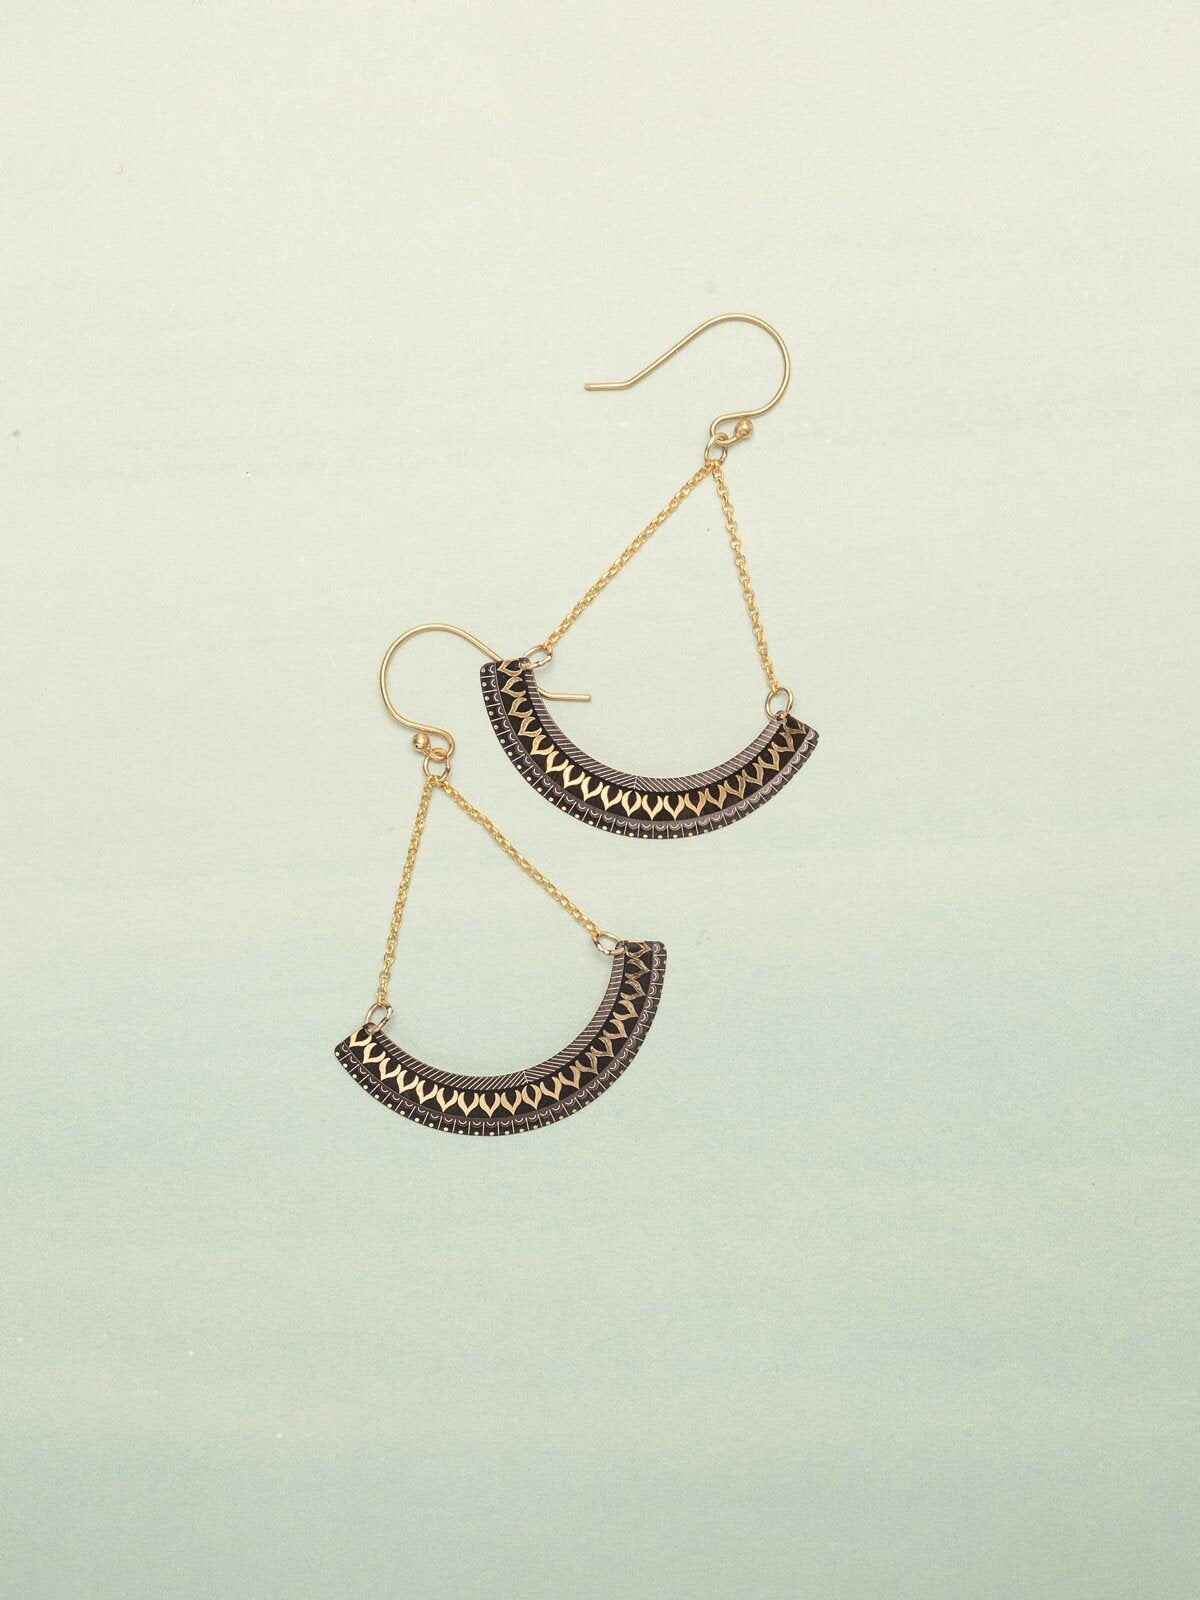 Holly Yashi Willow Weave Earrings - Amber Waves    